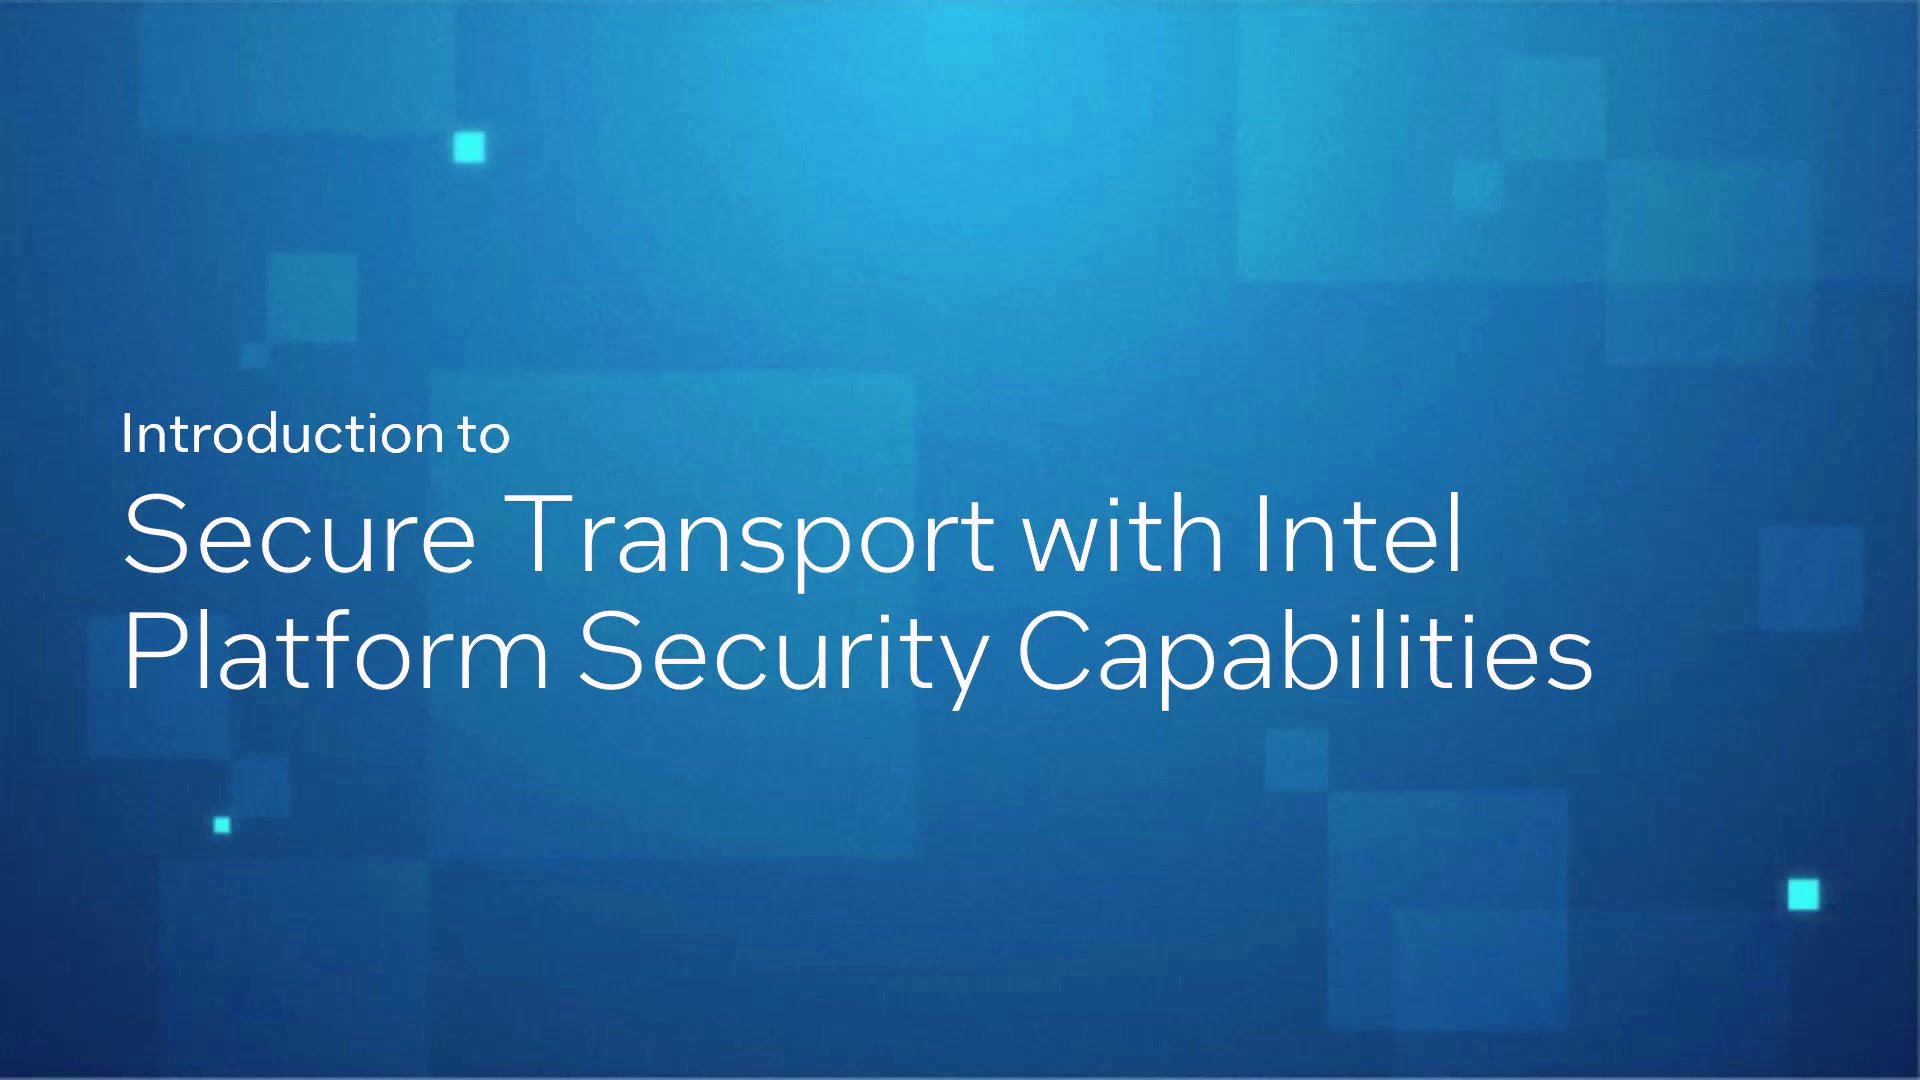 Secure Transport with Intel Platform Security Capabilities